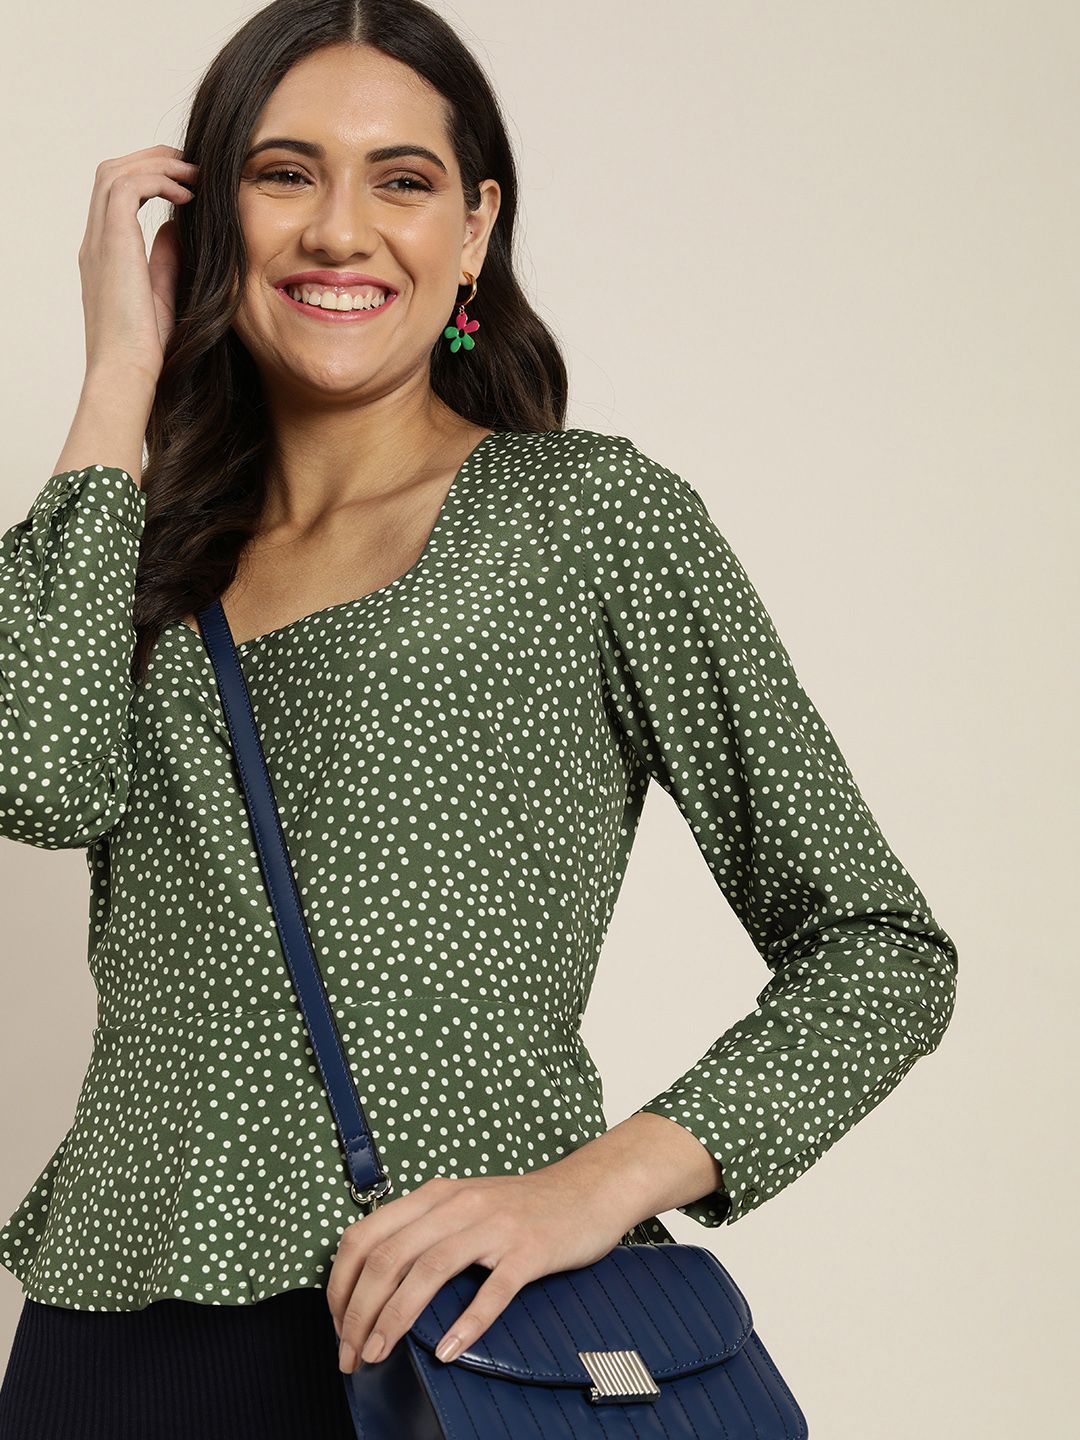 encore by INVICTUS Green & White Polka Dots Print Peplum Top Price in India